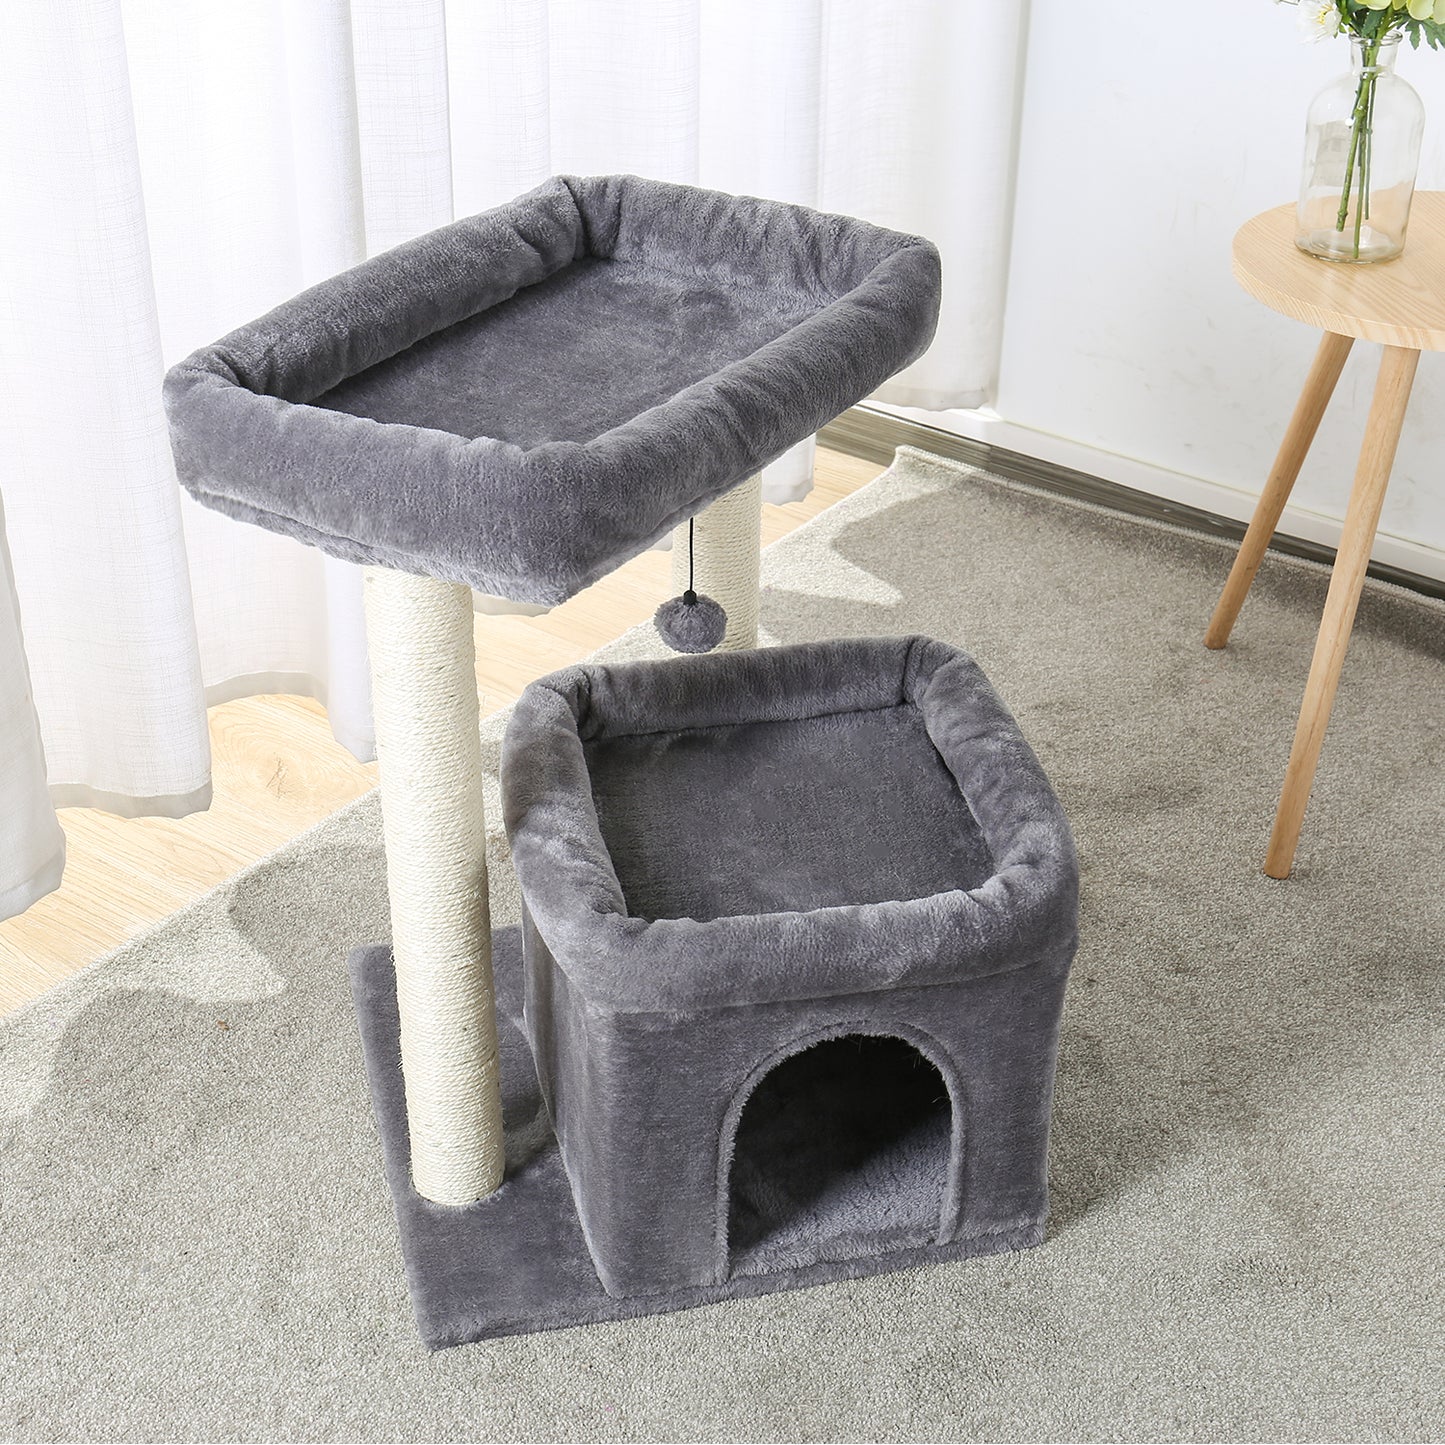 PAWZ Road Cat Tree with Sisal-Covered Scratching Posts